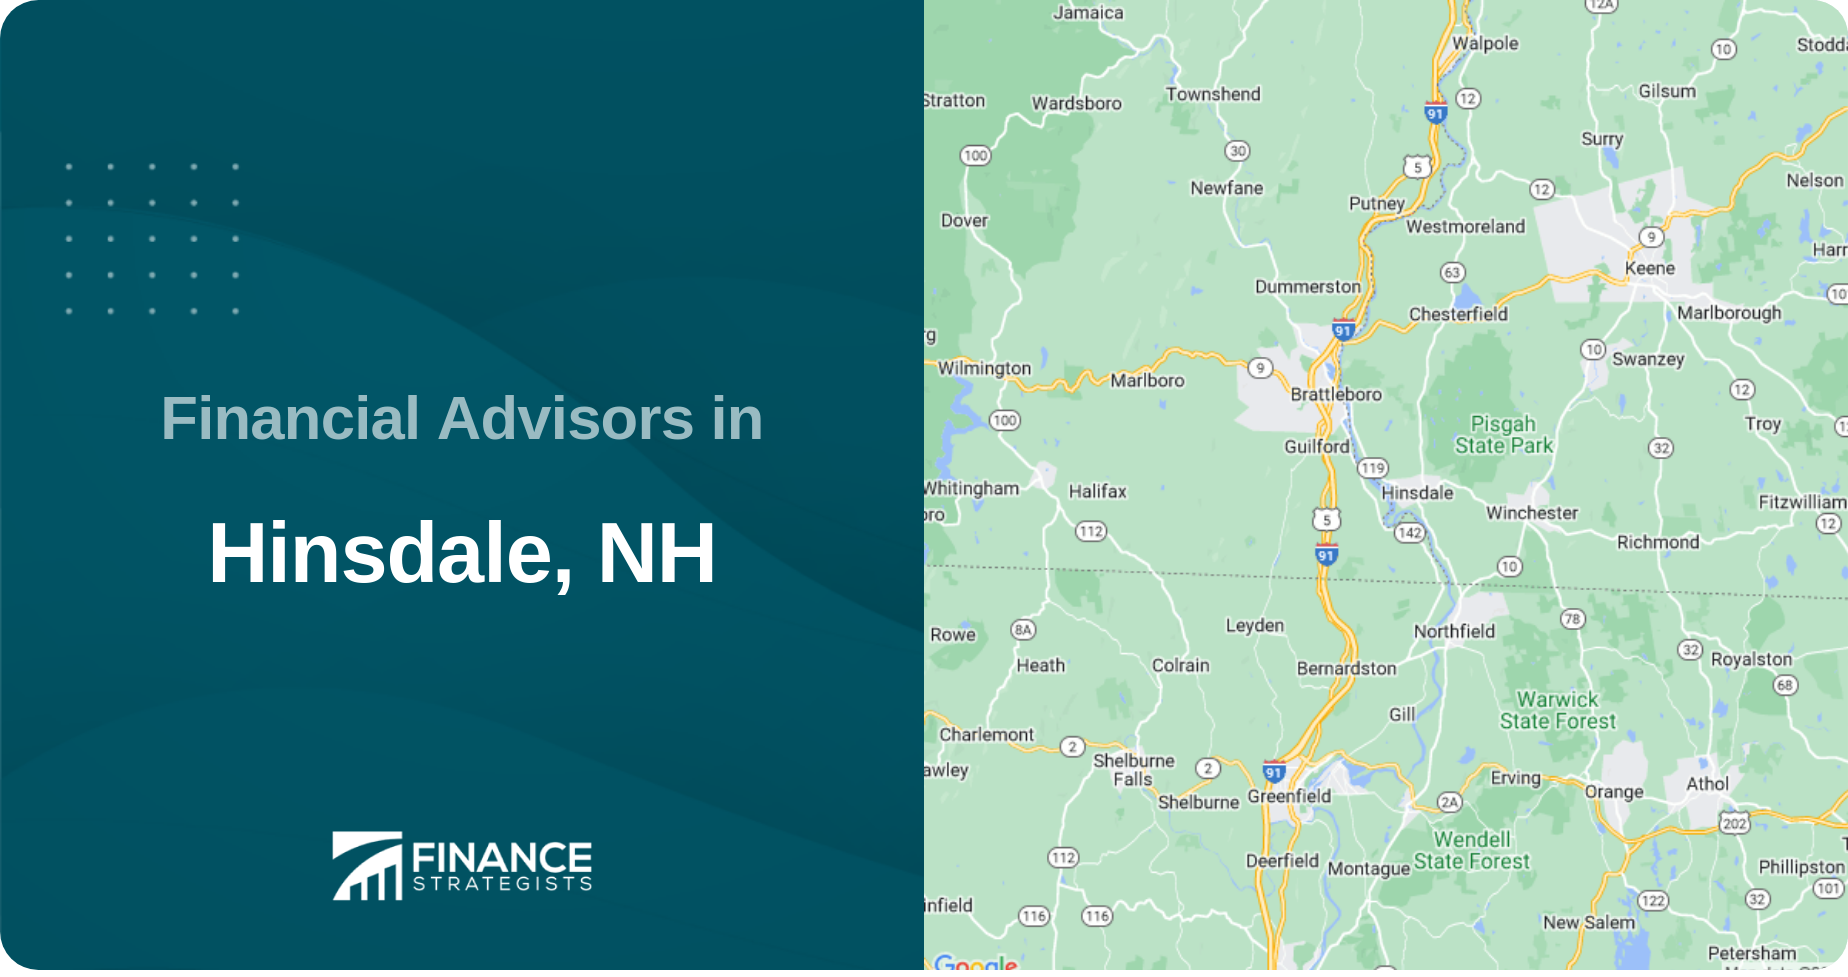 Financial Advisors in Hinsdale, NH